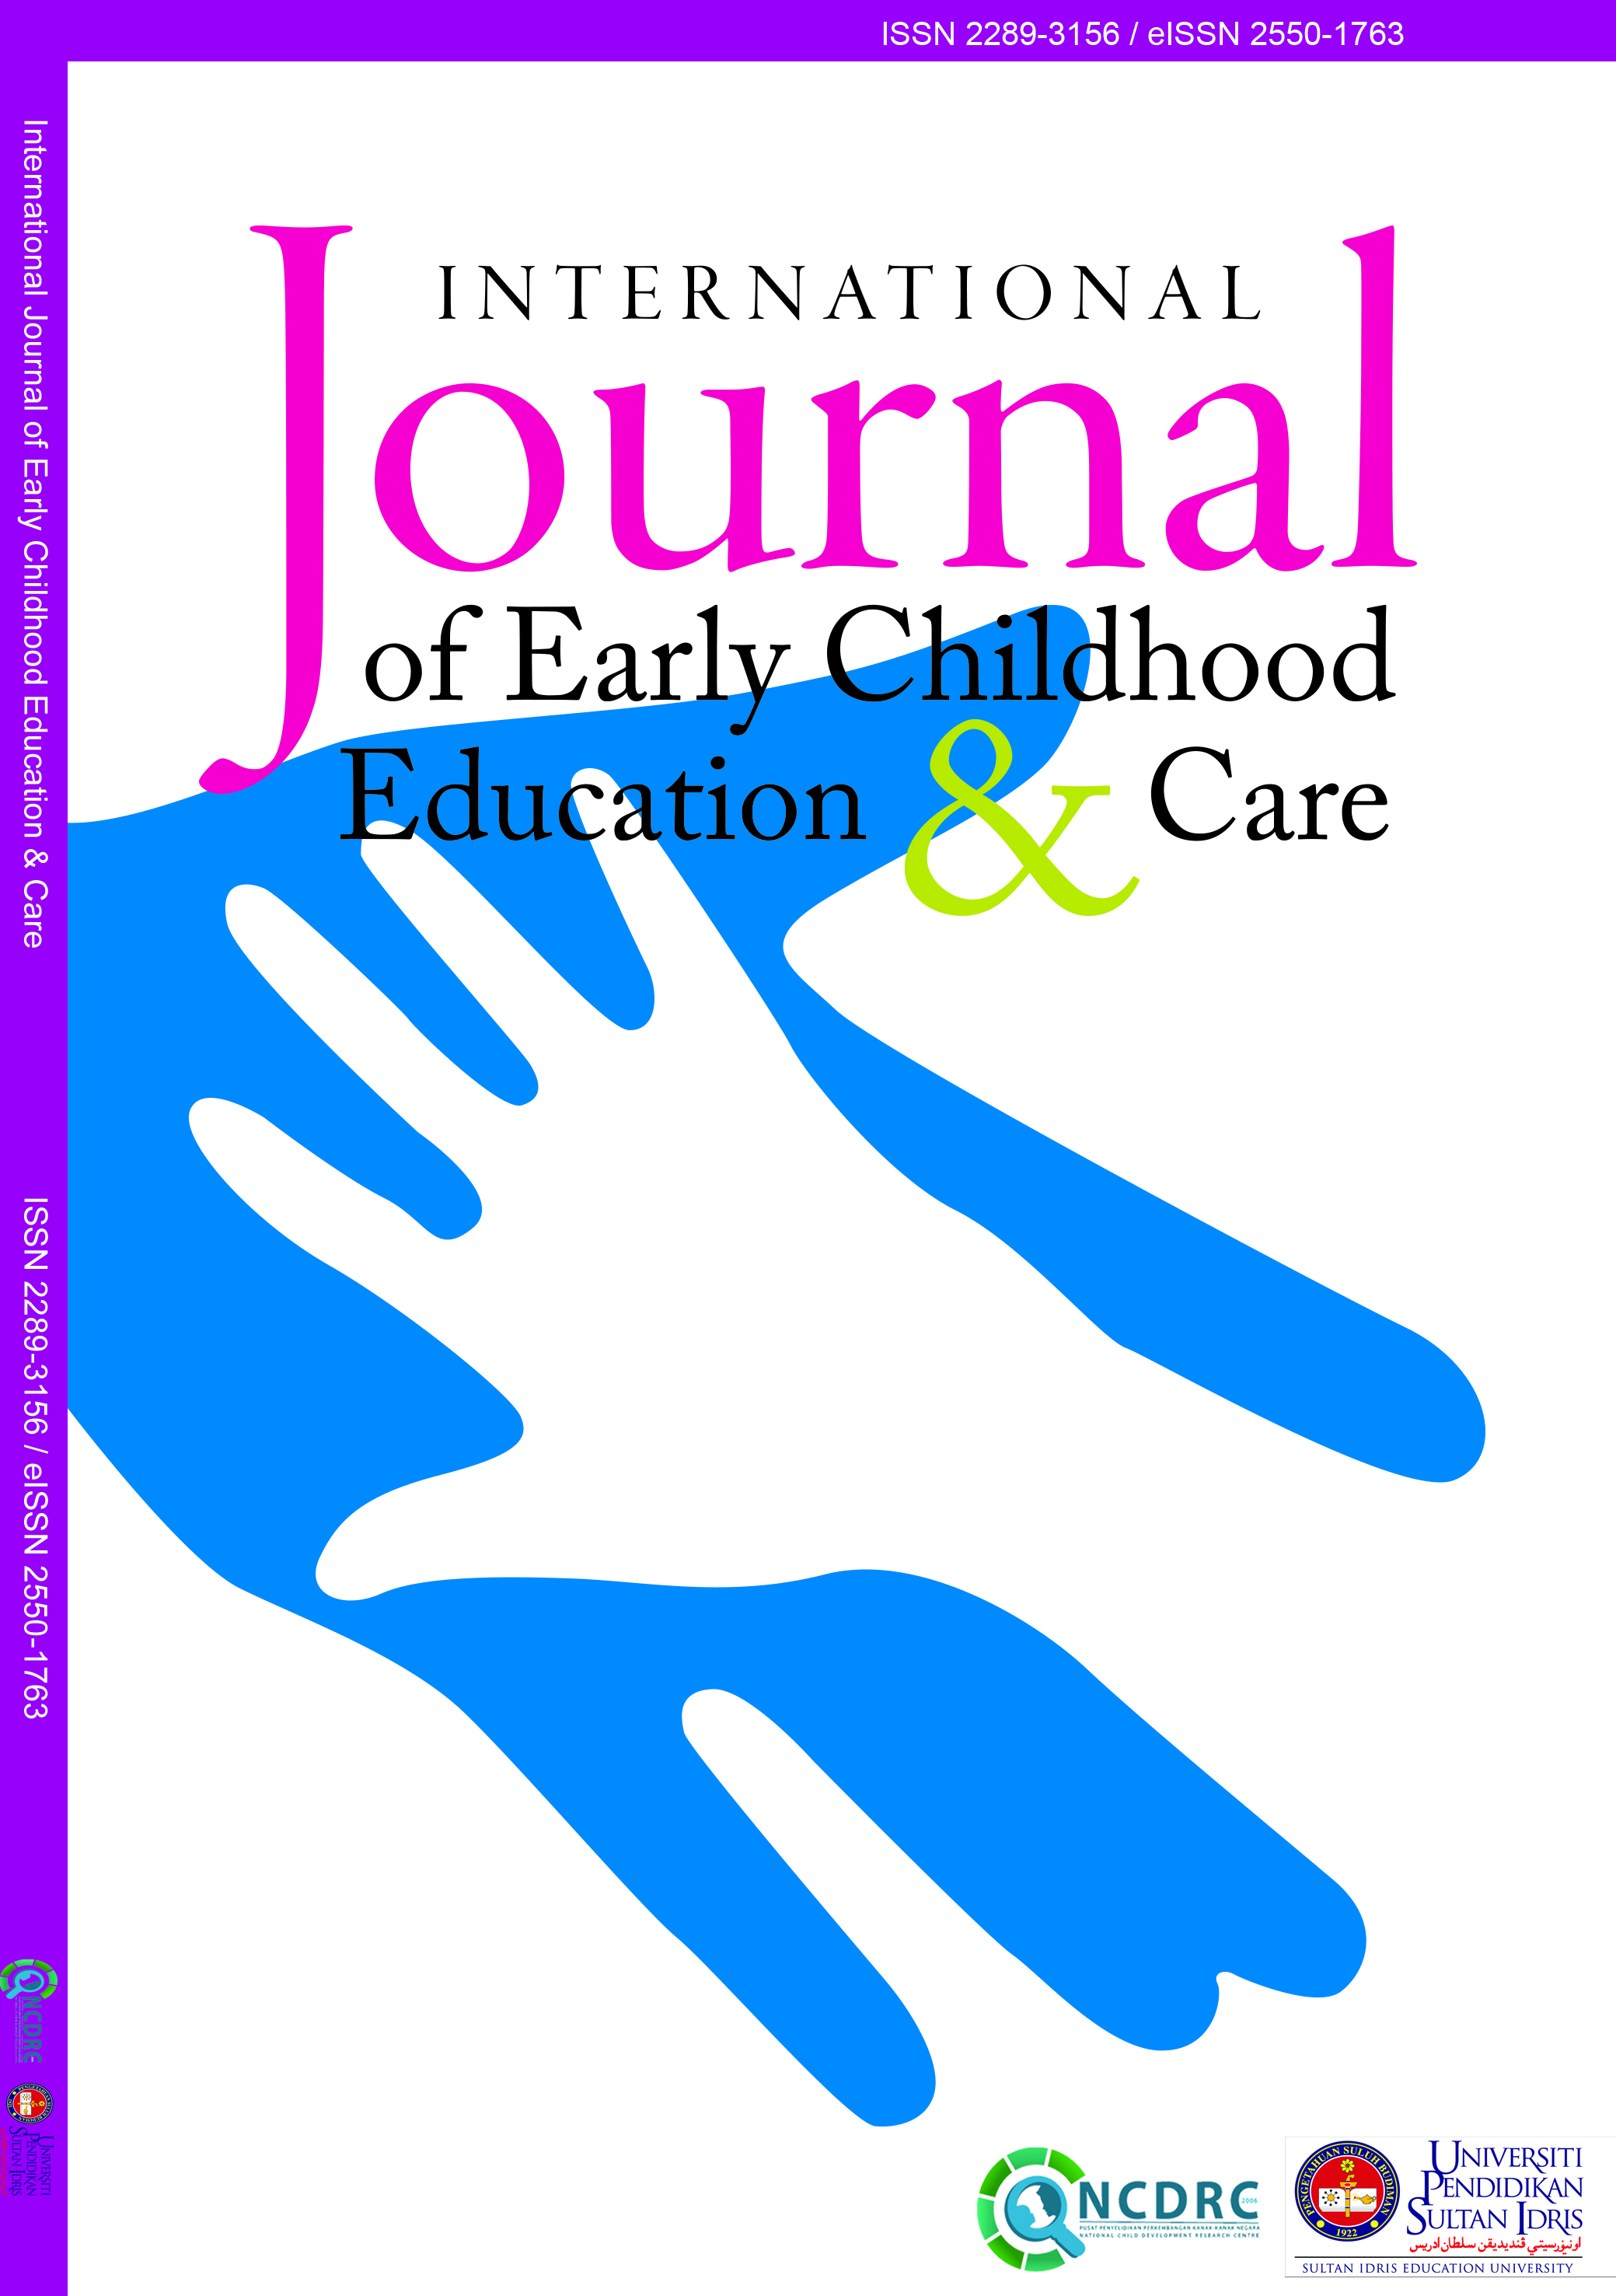 					View Vol. 3 (2014): International Journal of Early Childhood Education and Care
				